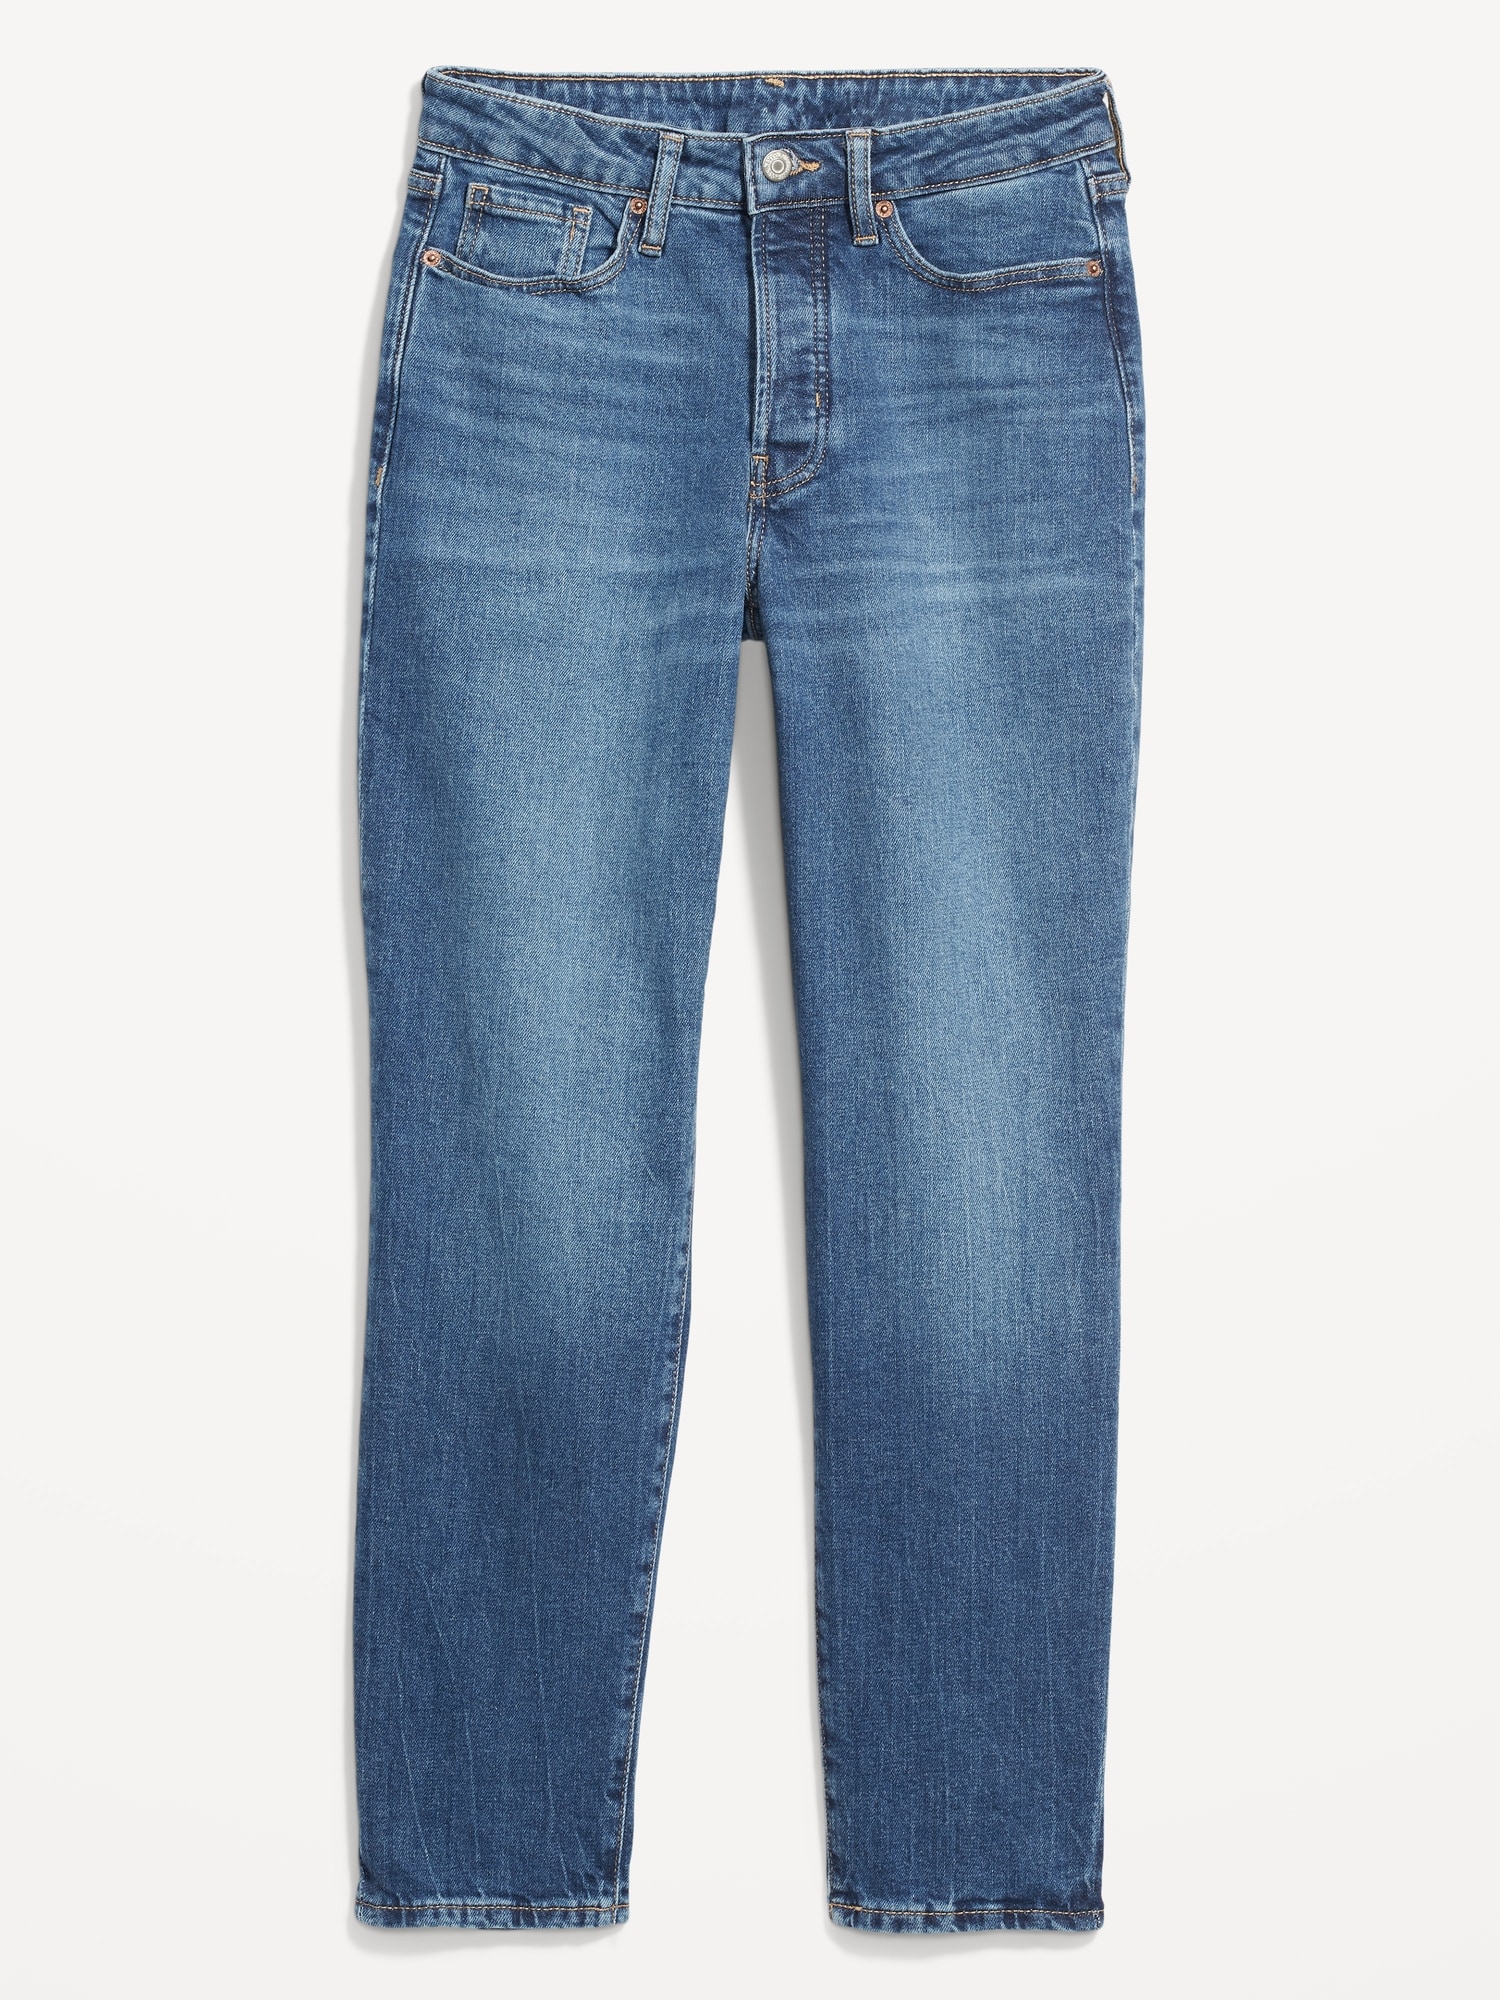 High-Waisted Button-Fly OG Straight Ankle Jeans for Women